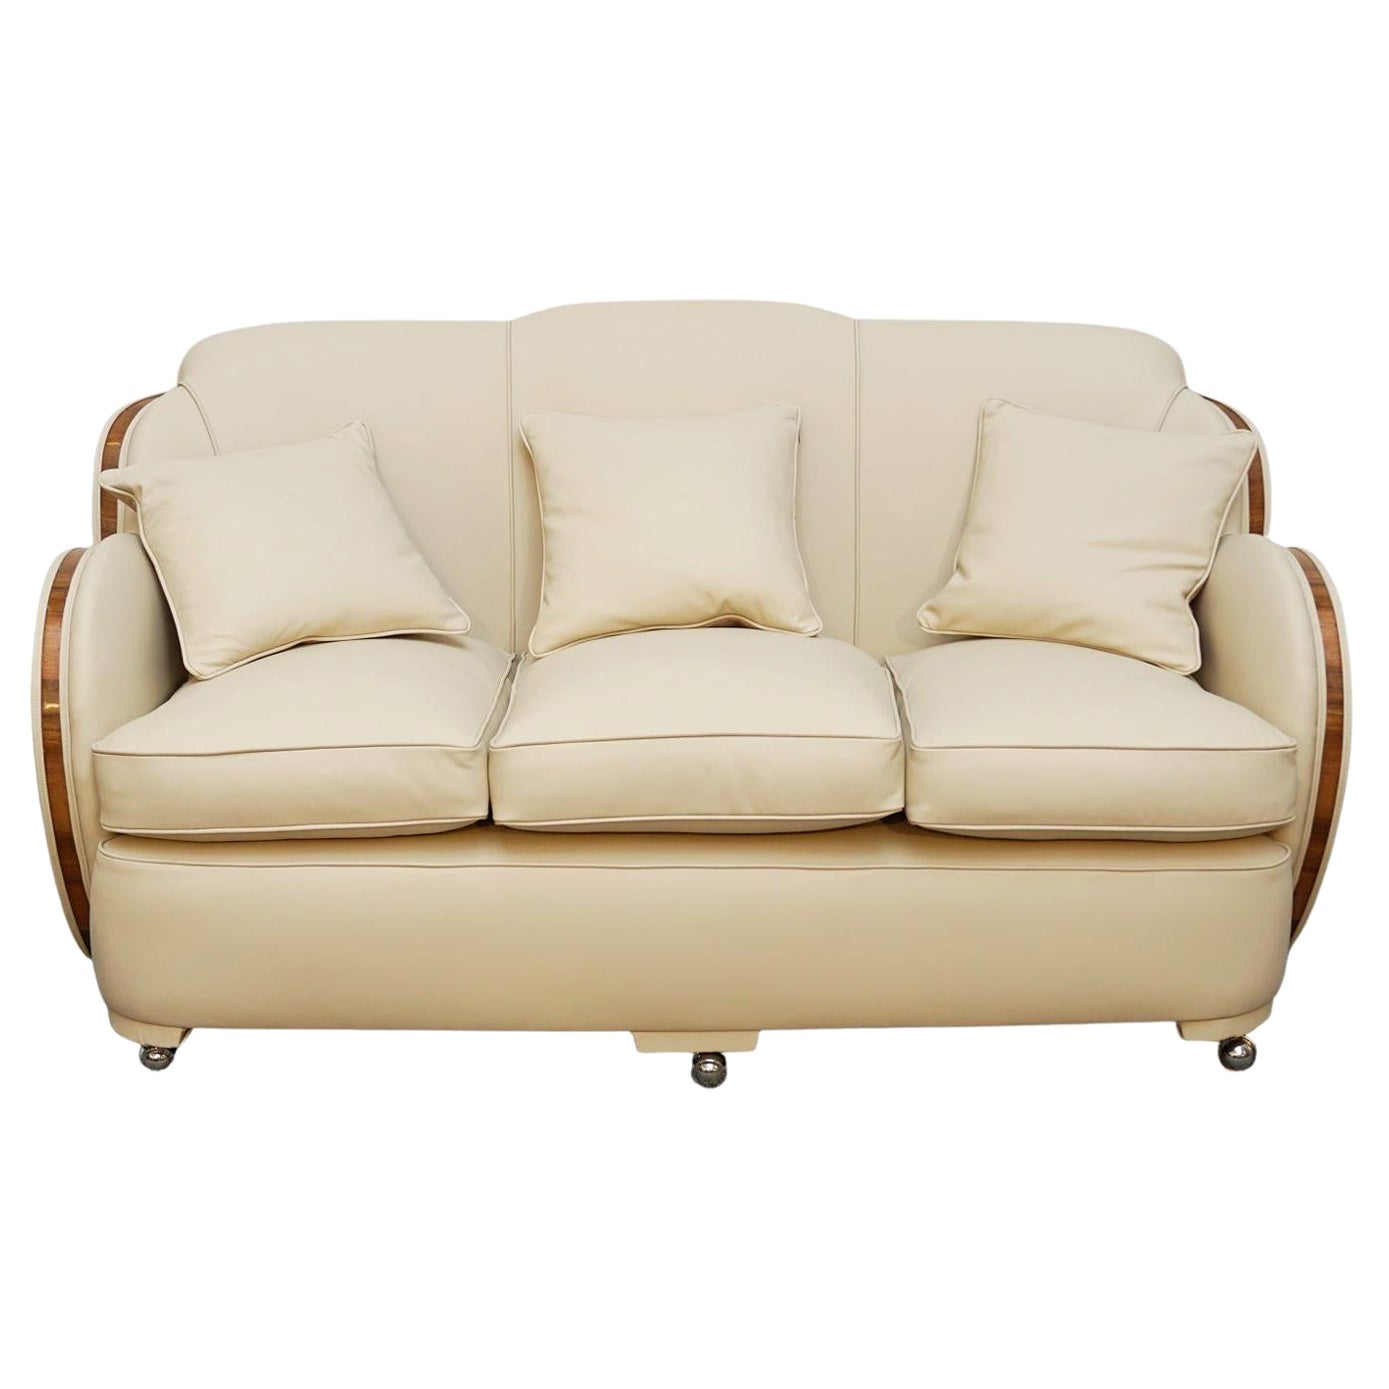 Art Deco Cloud Sofa Re-Upholstered in Cream Leather with Walnut Banding